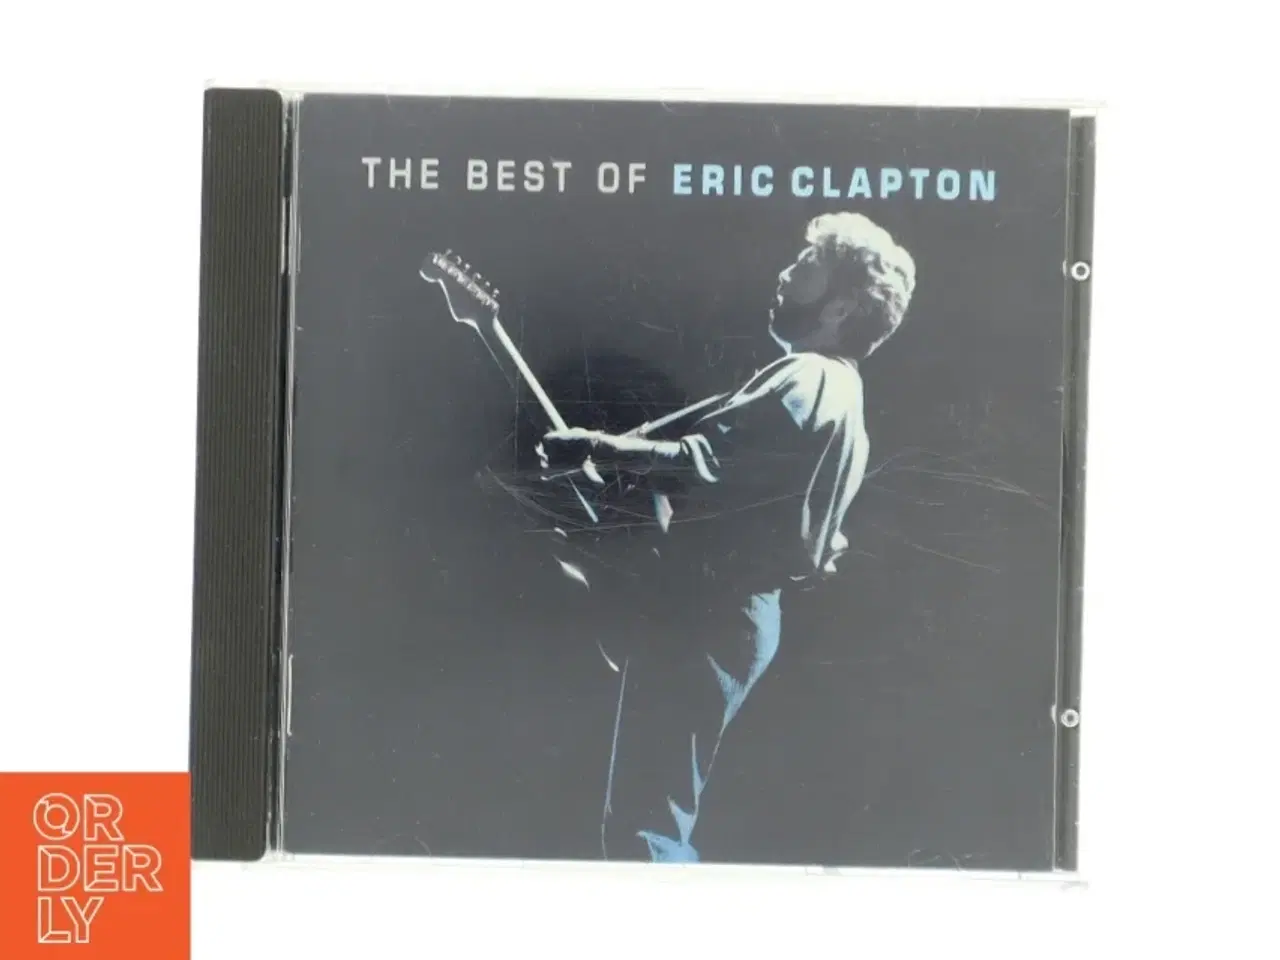 Billede 1 - Eric Clapton CD - The Best of Eric Clapton fra Polydor Records